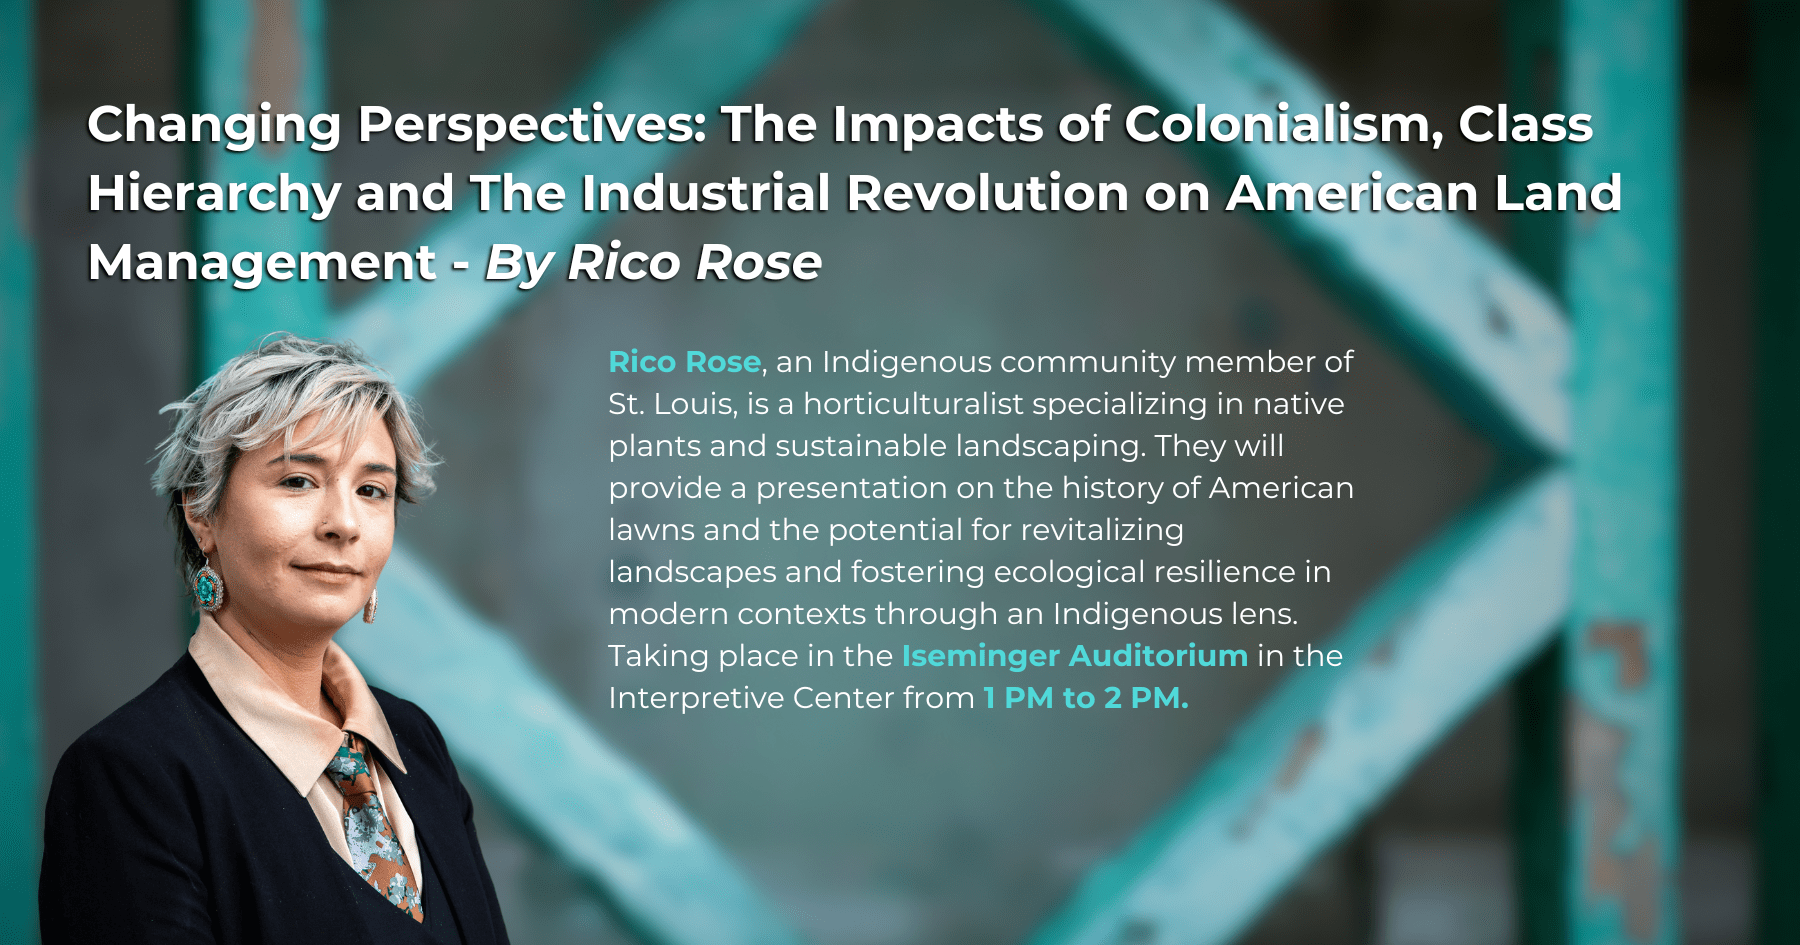 Changing Perspectives: The Impacts of Colonialism, Class Hierarchy and The Industrial Revolution on American Land Management - By Rico Rose